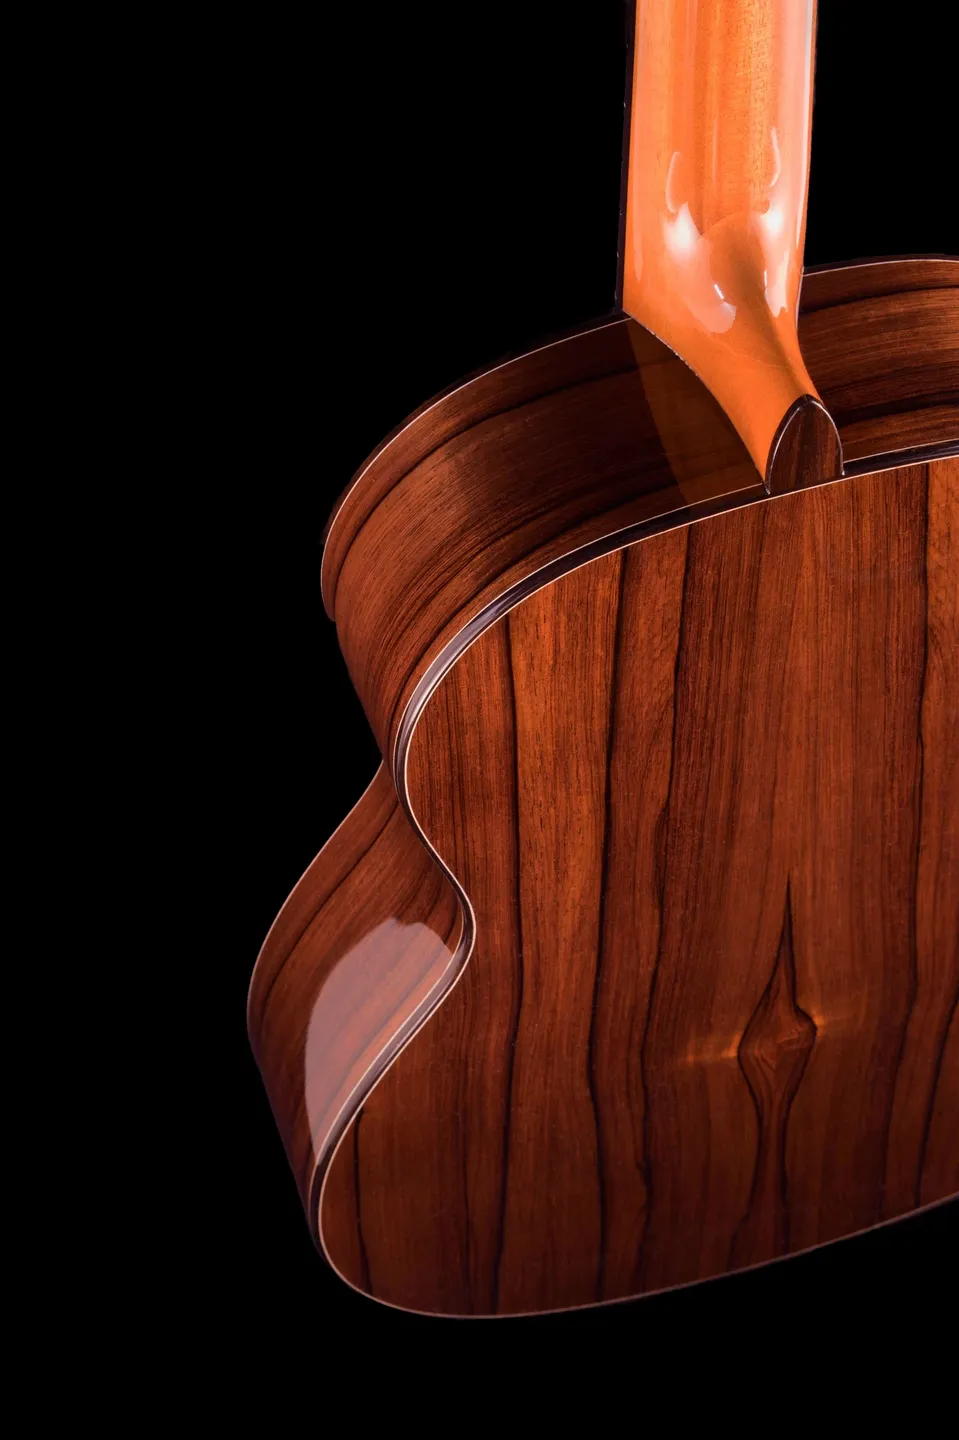 A beautiful wooden color pattern on the guitar